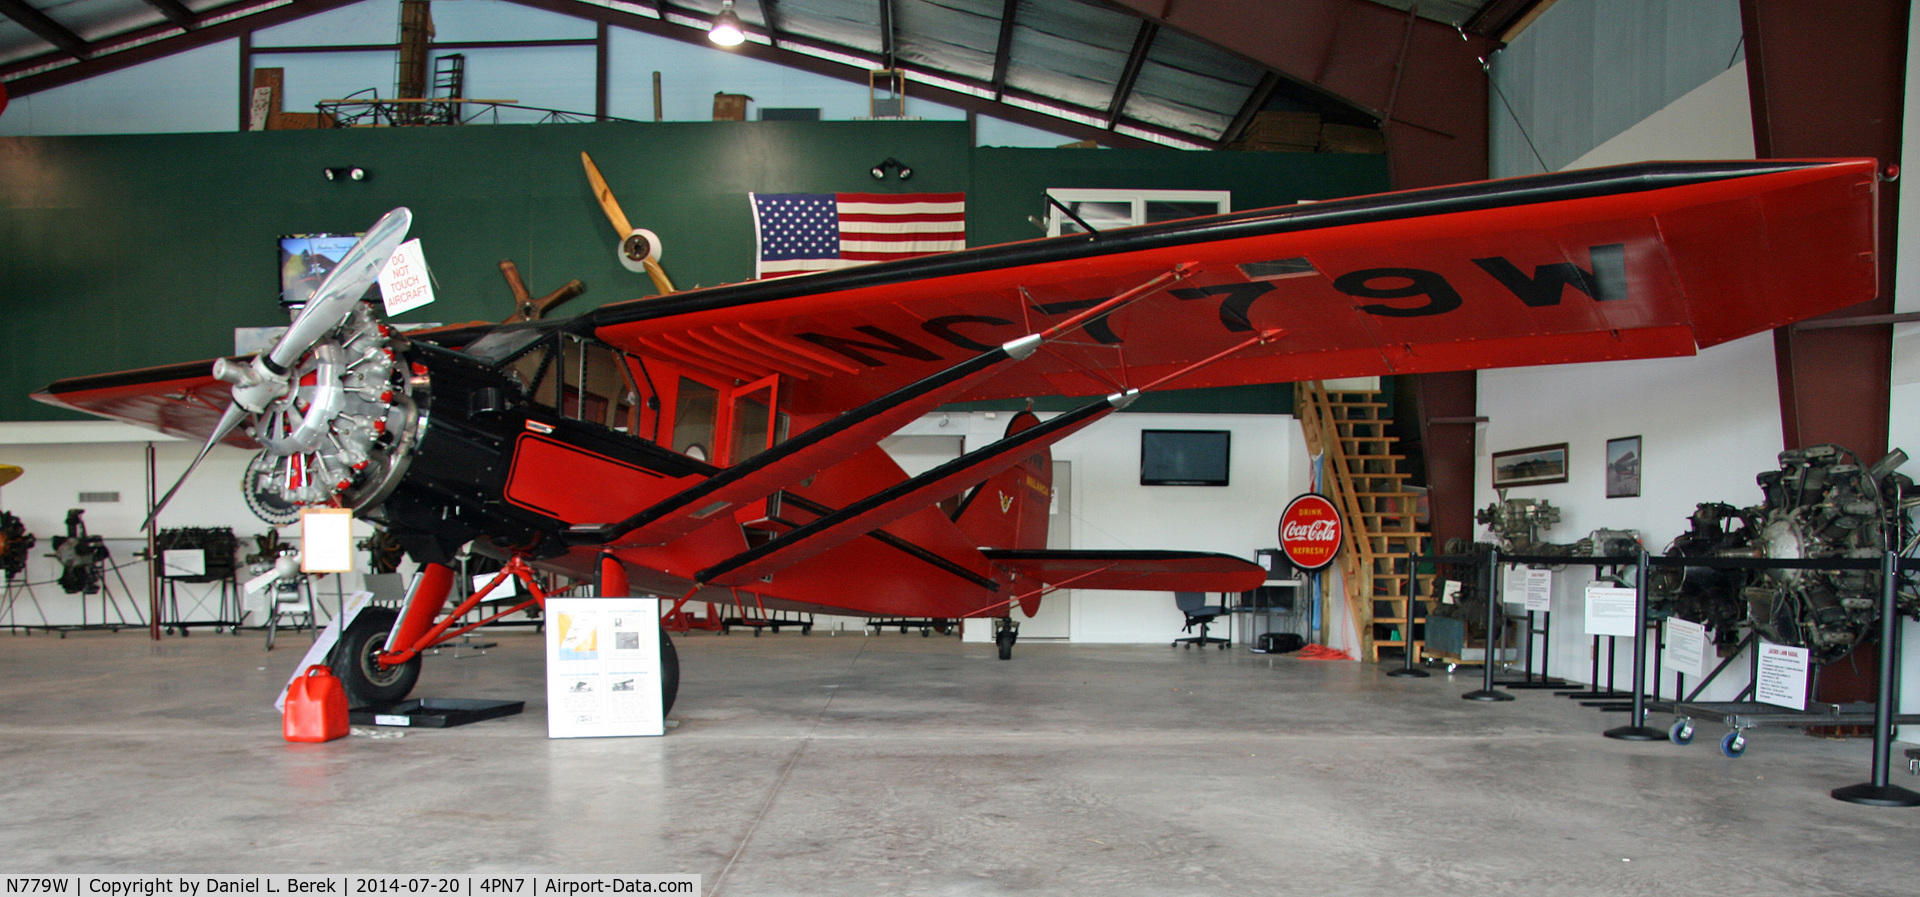 N779W, 1930 Bellanca CH-400 Skyrocket C/N 617, This beauty is one of only two examples of the Skyrocket existing, the other being at the Virginia Aviation Museum.  Of the two, this is the more genuine.